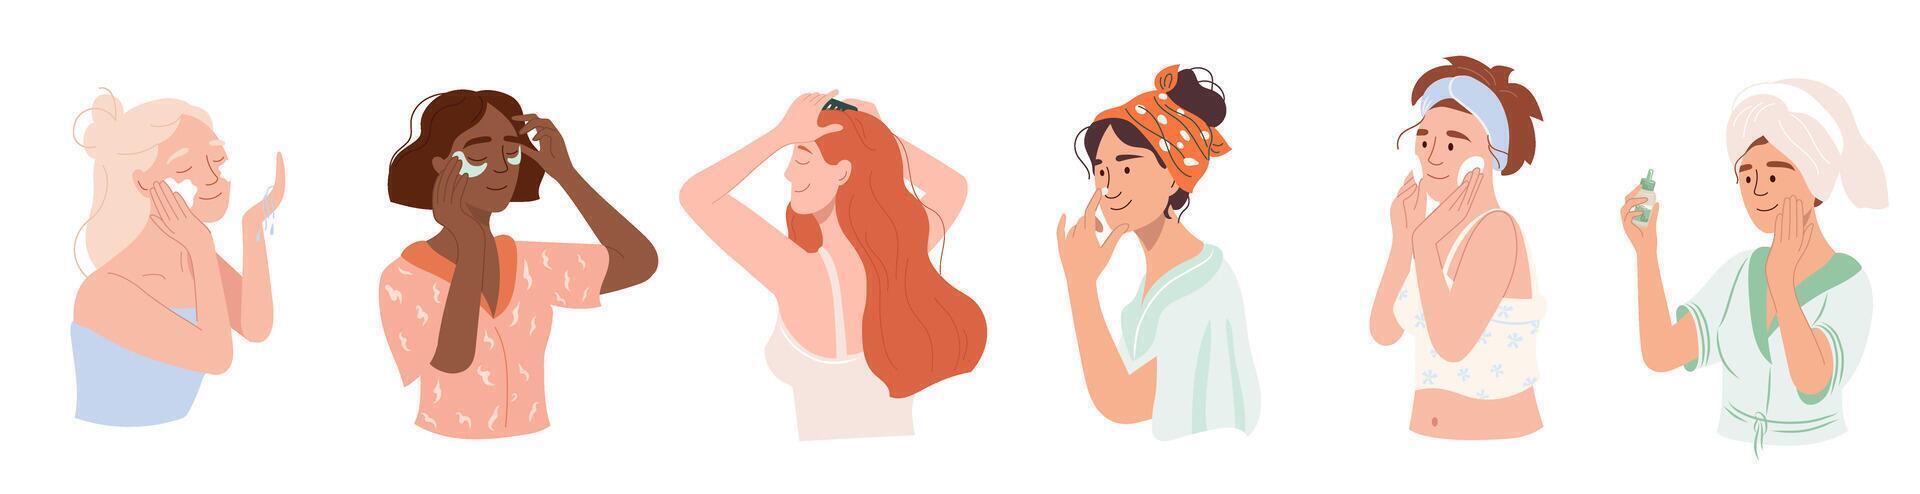 Happy girls applying cleansing and moisturizing face skincare products at home. Flat illustration everyday care routine of different skin type young women vector